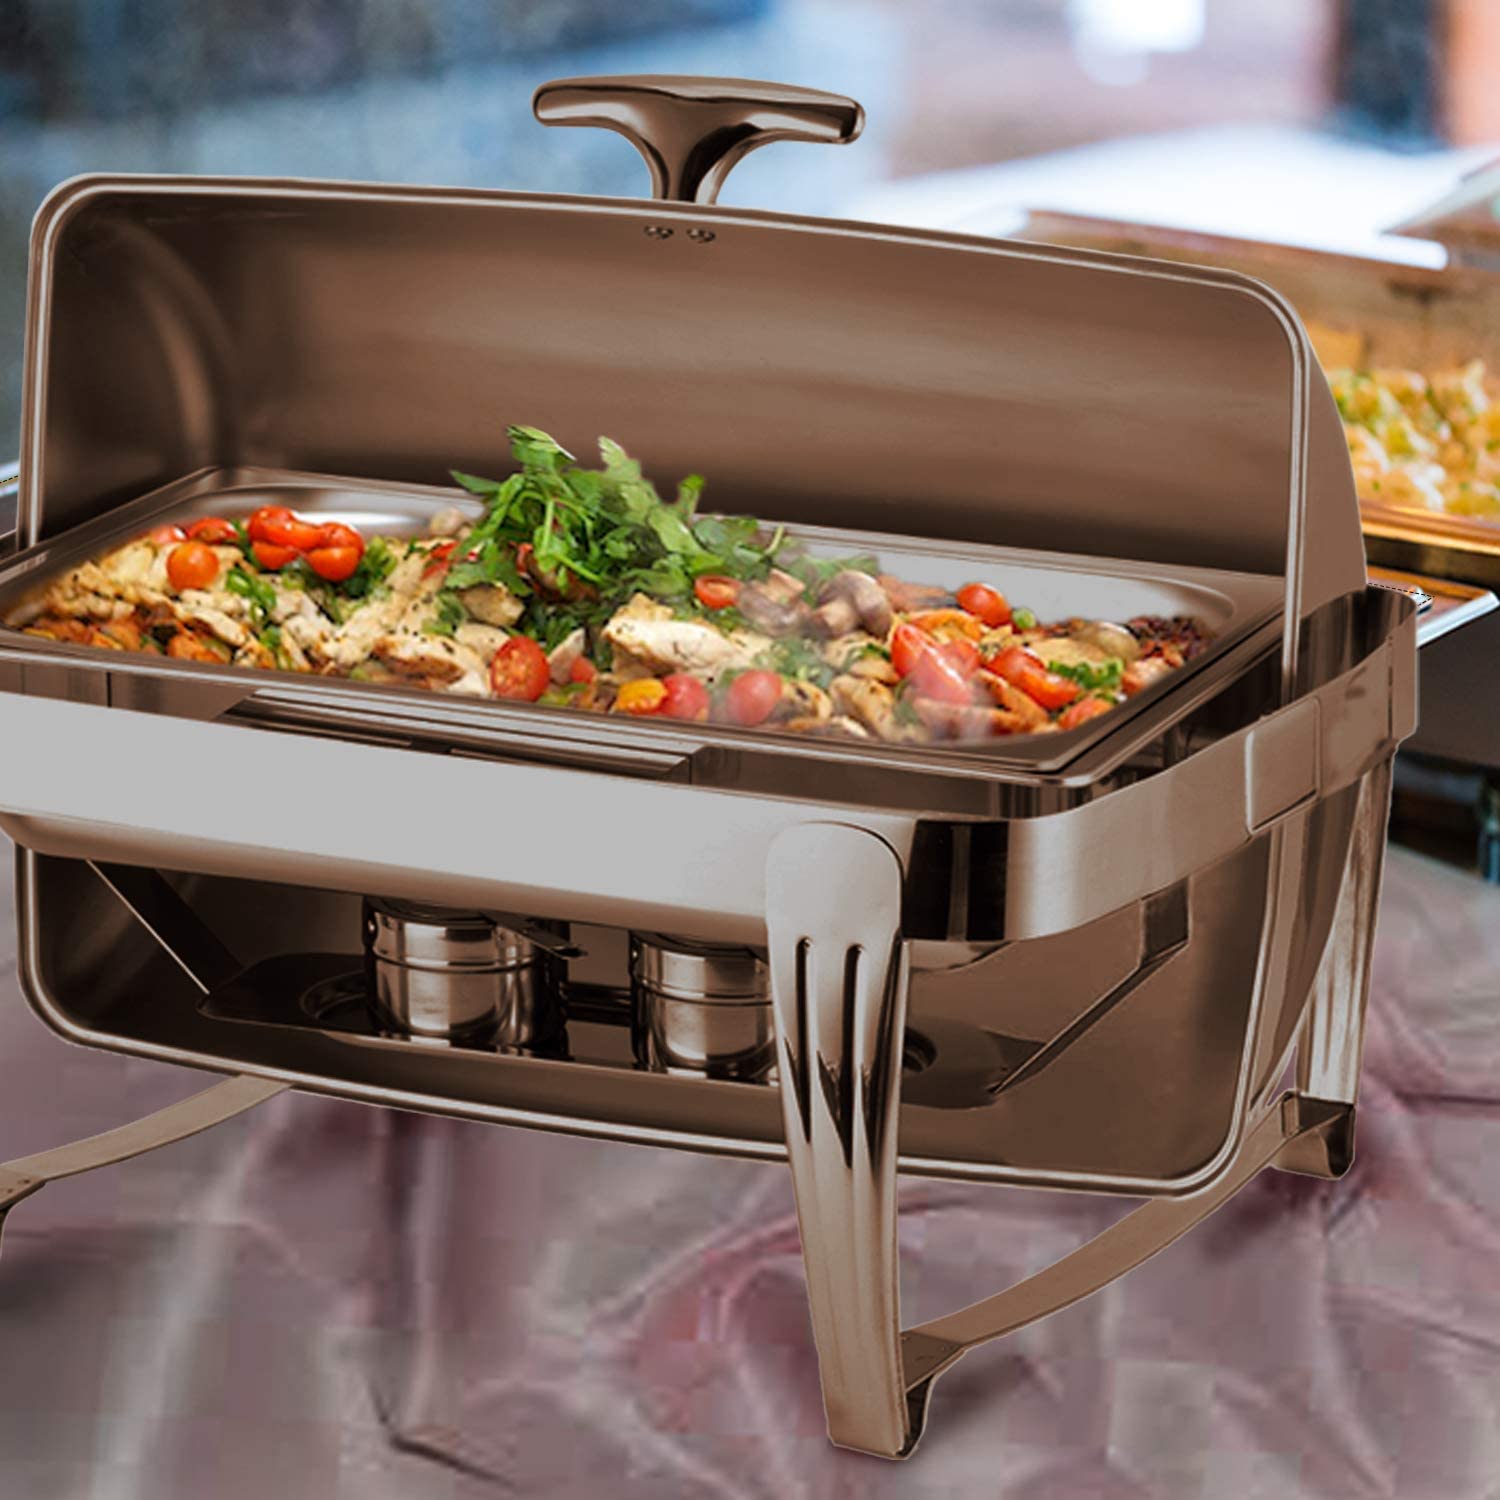 Deluxe High End Stainless Steel Chafer with Roll Top, 8 Quart